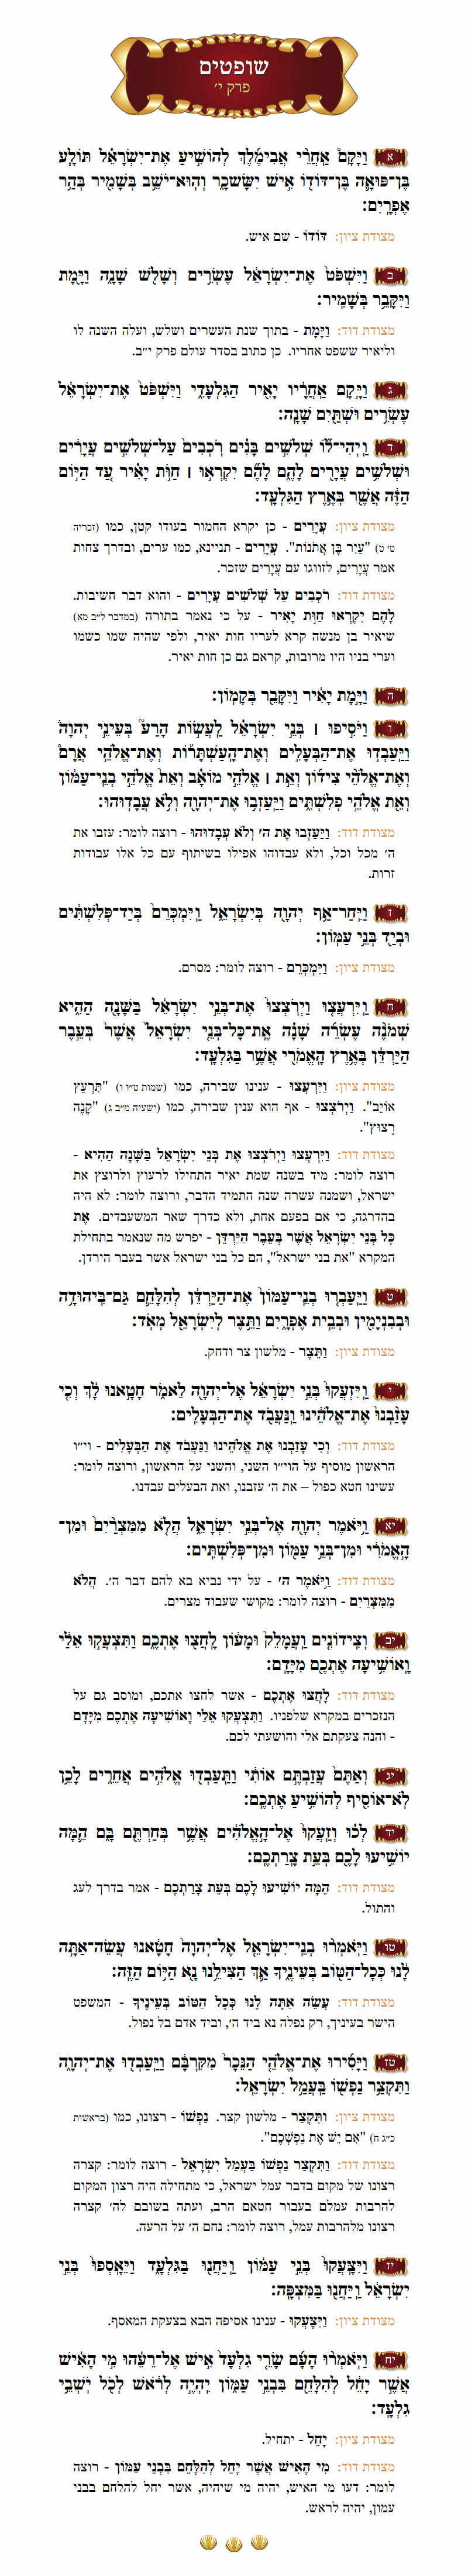 Sefer Shoftim Chapter 10 with commentary